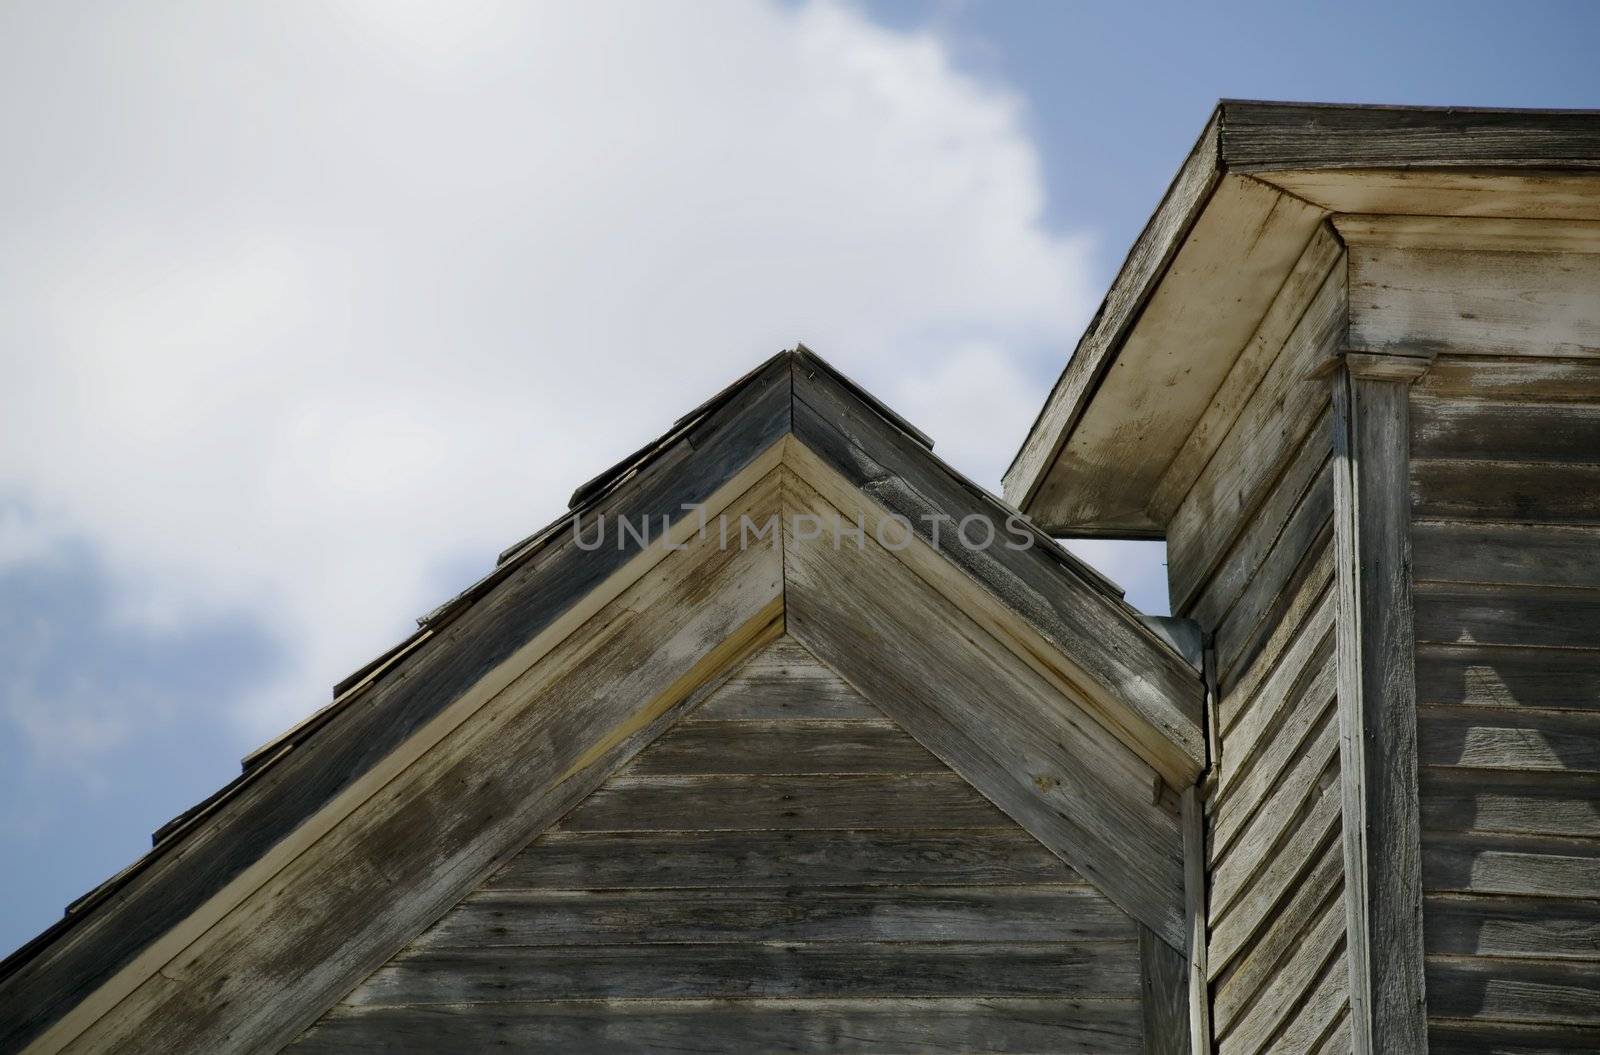 Wooden roof of a neglected and abandoned rural church.